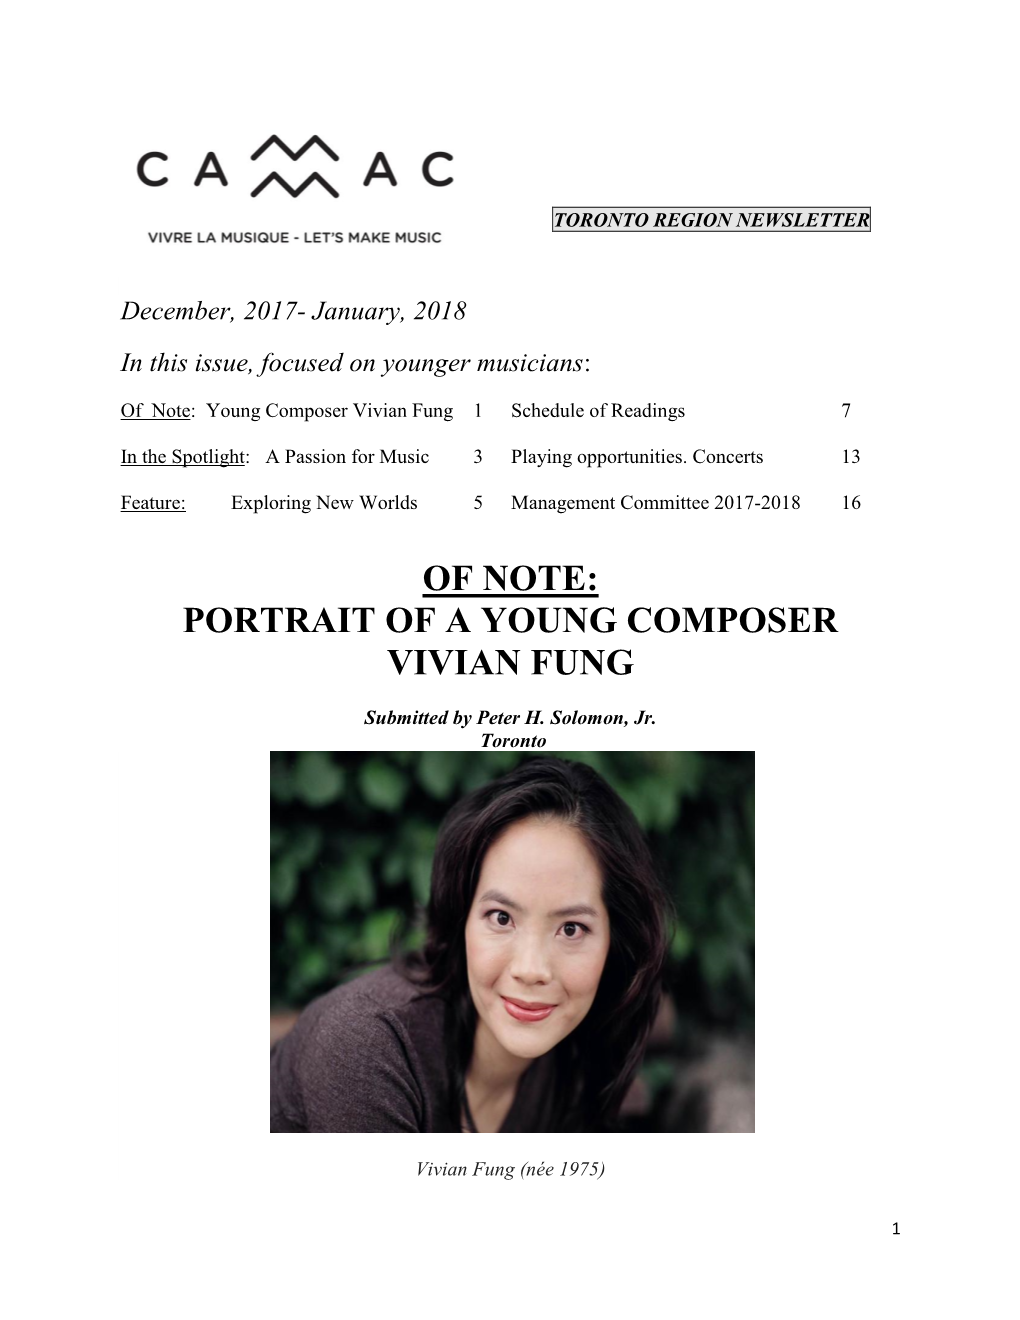 Of Note: Portrait of a Young Composer Vivian Fung